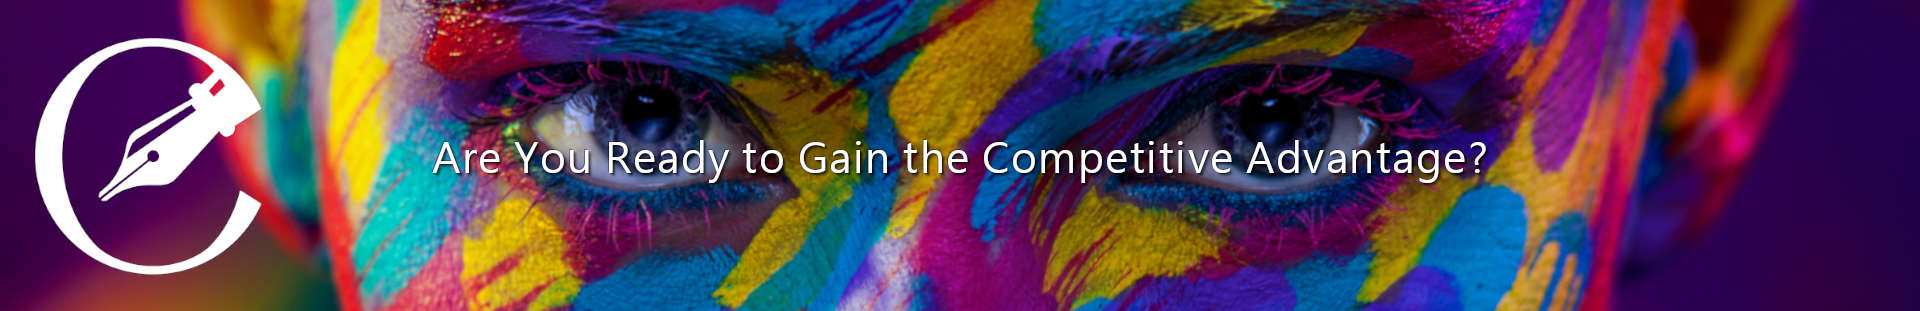 Are You Ready to Gain the Competitive Advantage with Content Branding Solutions?